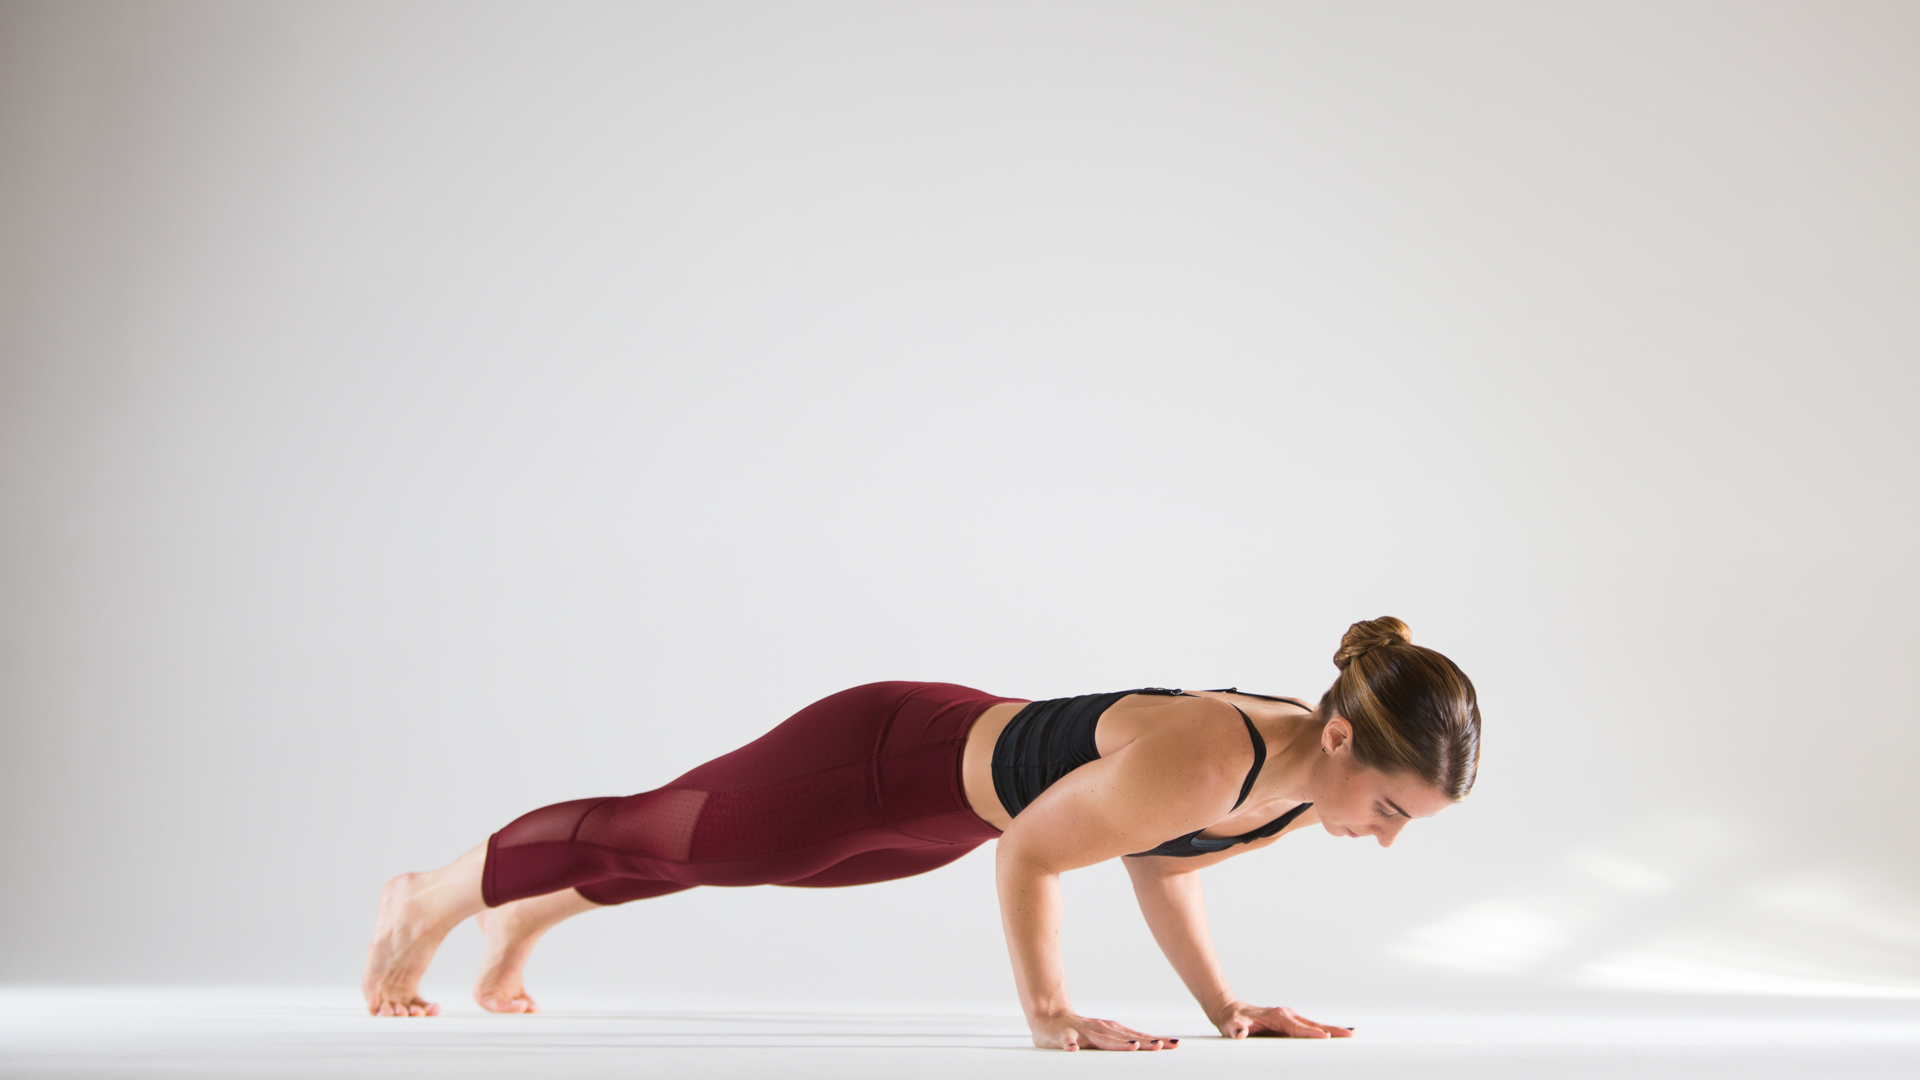 Chaturanga is one pose in yoga that can be quite difficult to get right. It  requires quite a bit of arm, shoulder and core st…